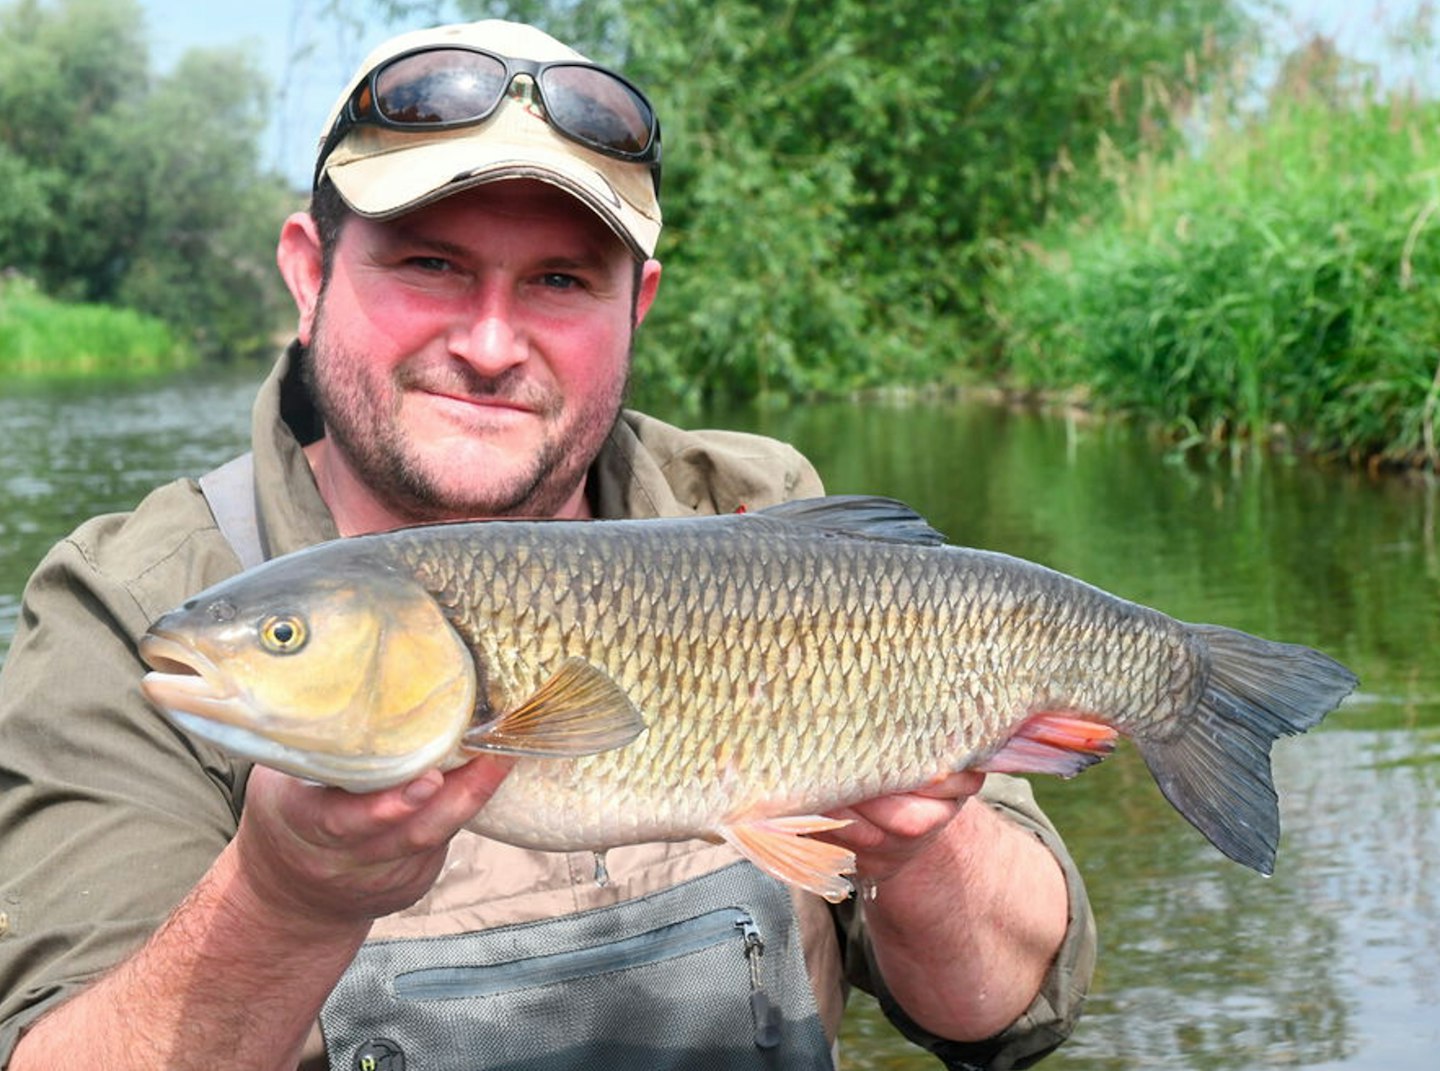 Follow the two-cast rule for chub with Dave Owen